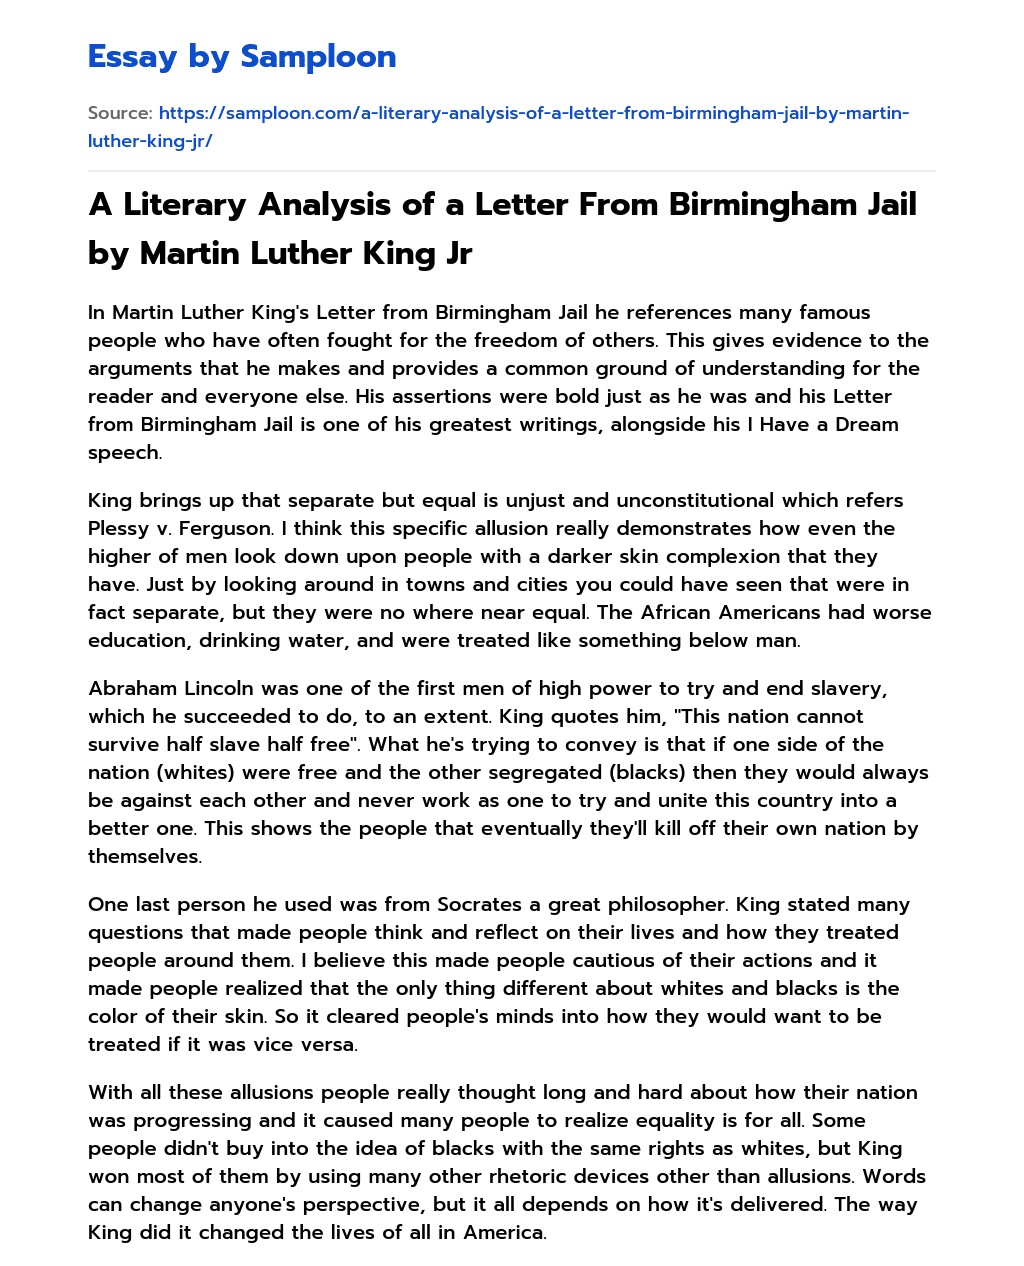 A Literary Analysis of a Letter From Birmingham Jail by Martin Luther King Jr essay